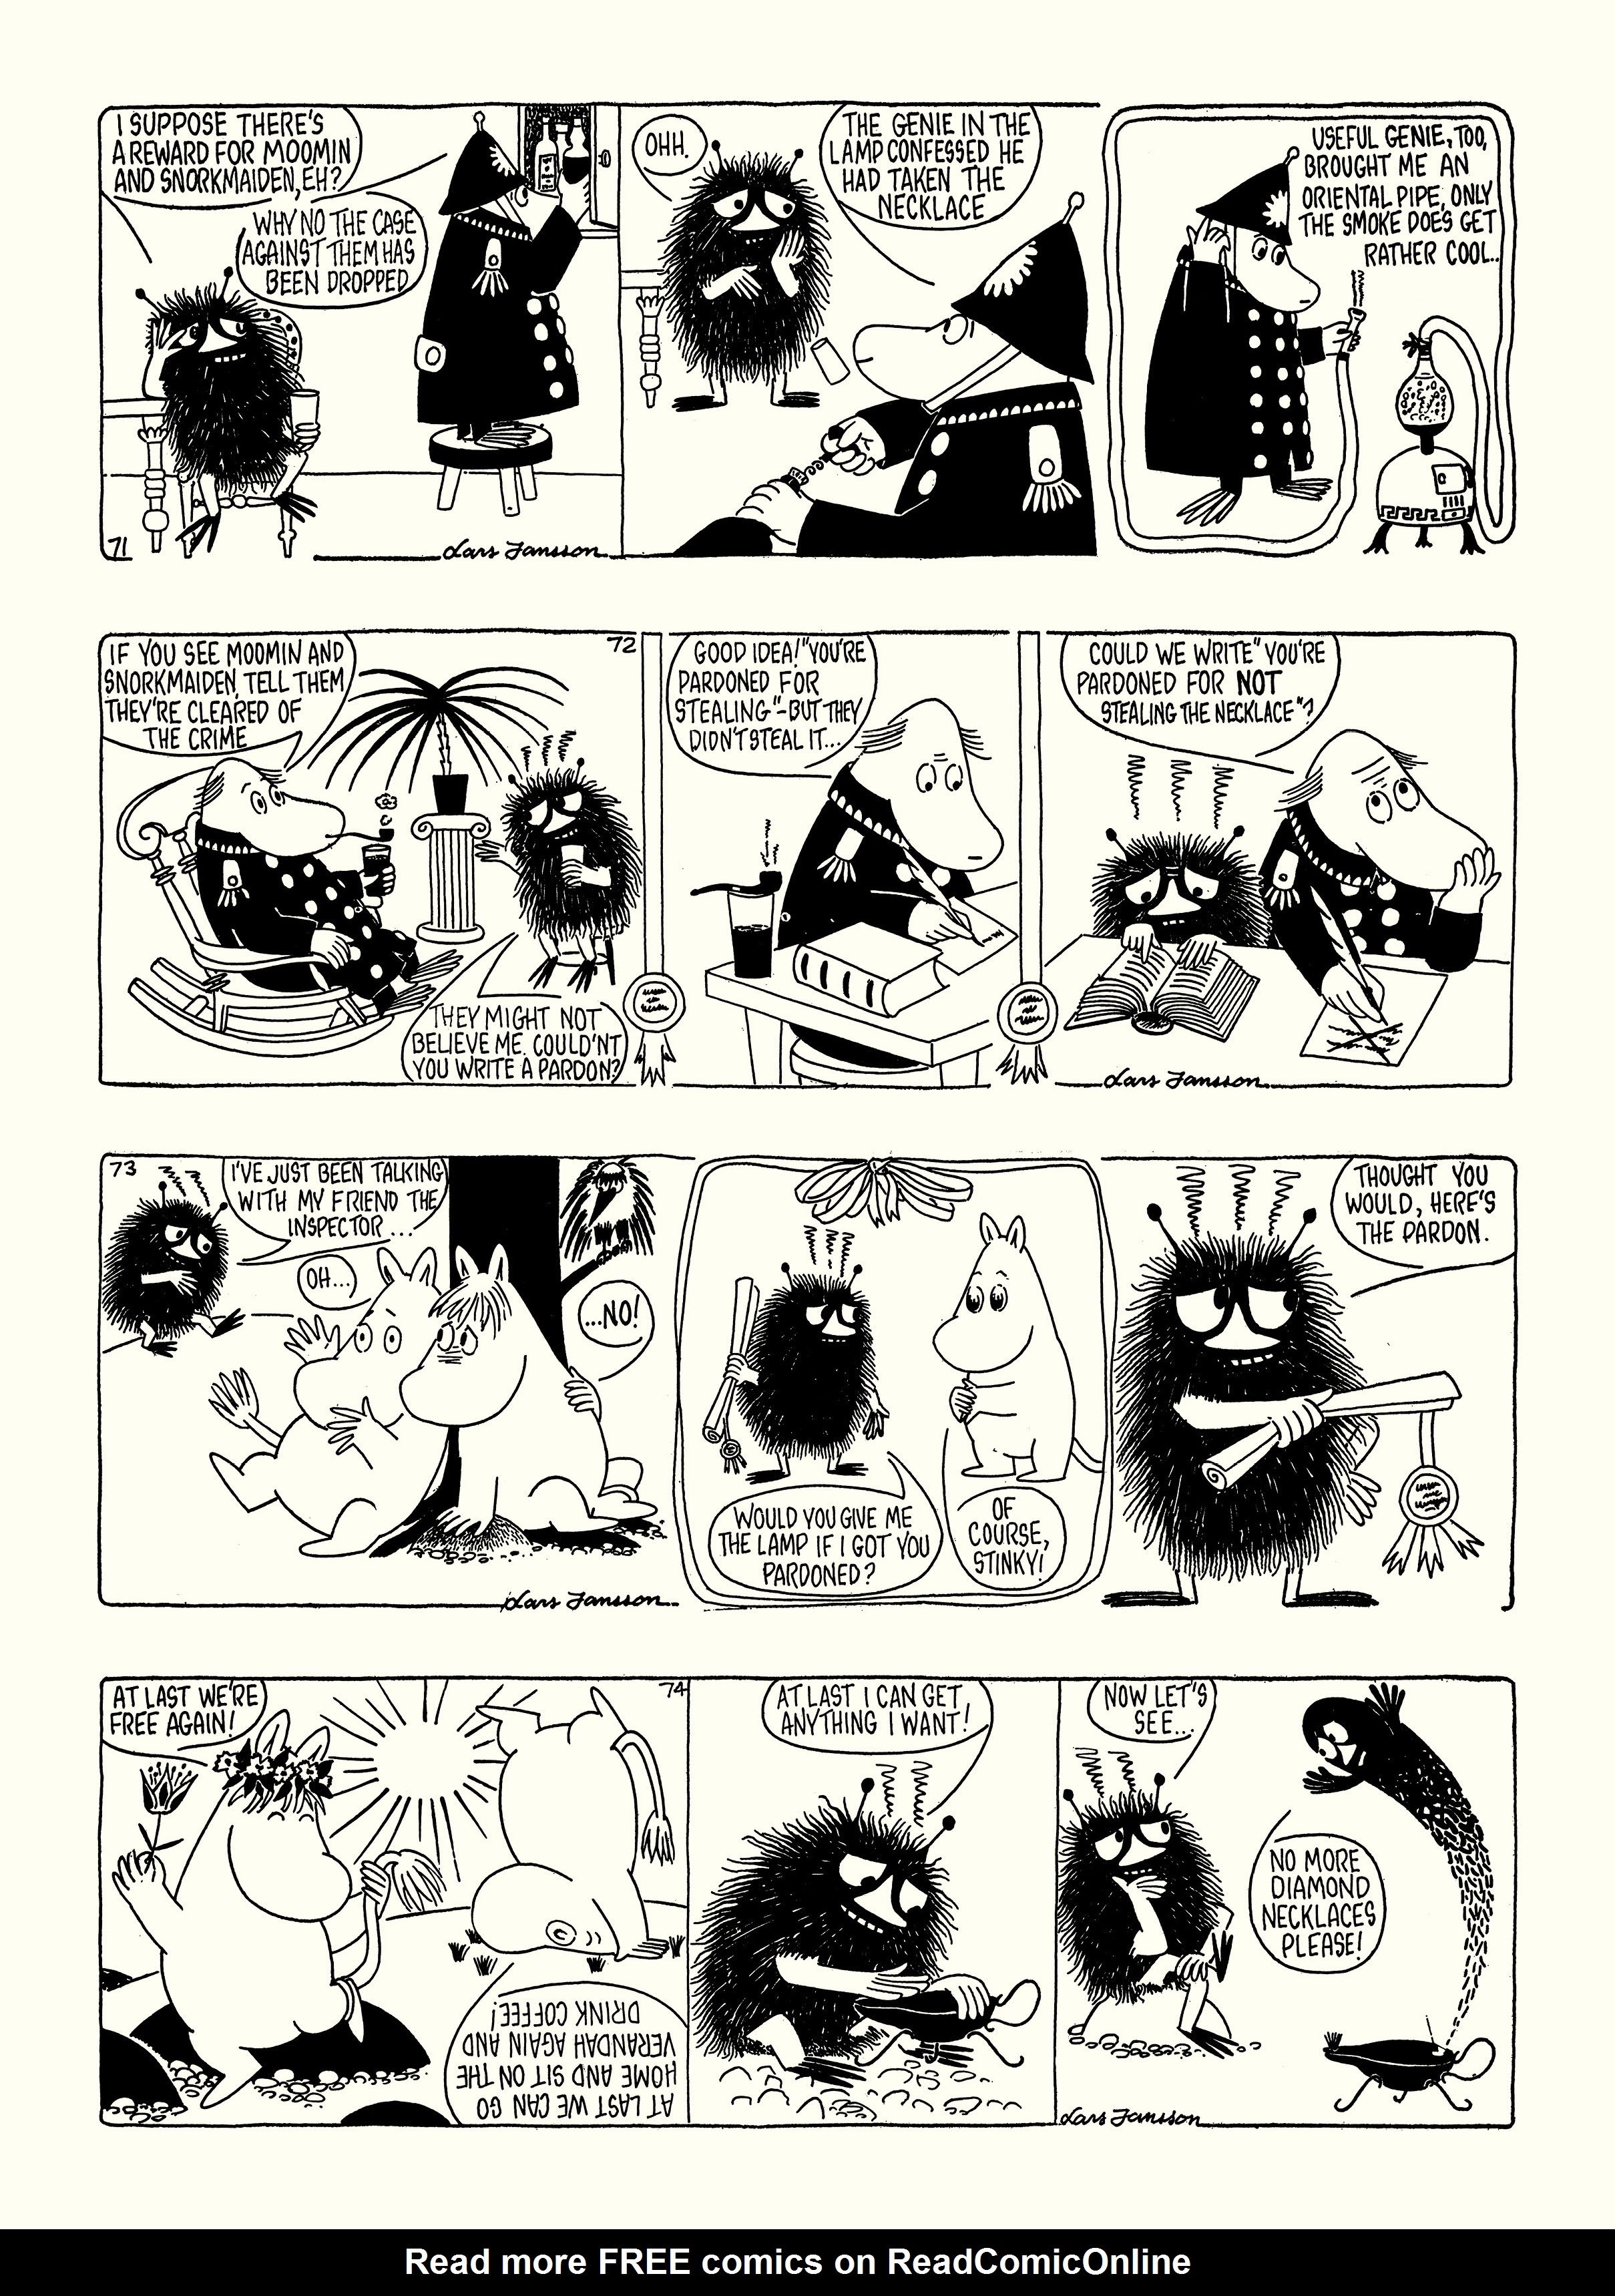 Read online Moomin: The Complete Lars Jansson Comic Strip comic -  Issue # TPB 6 - 24